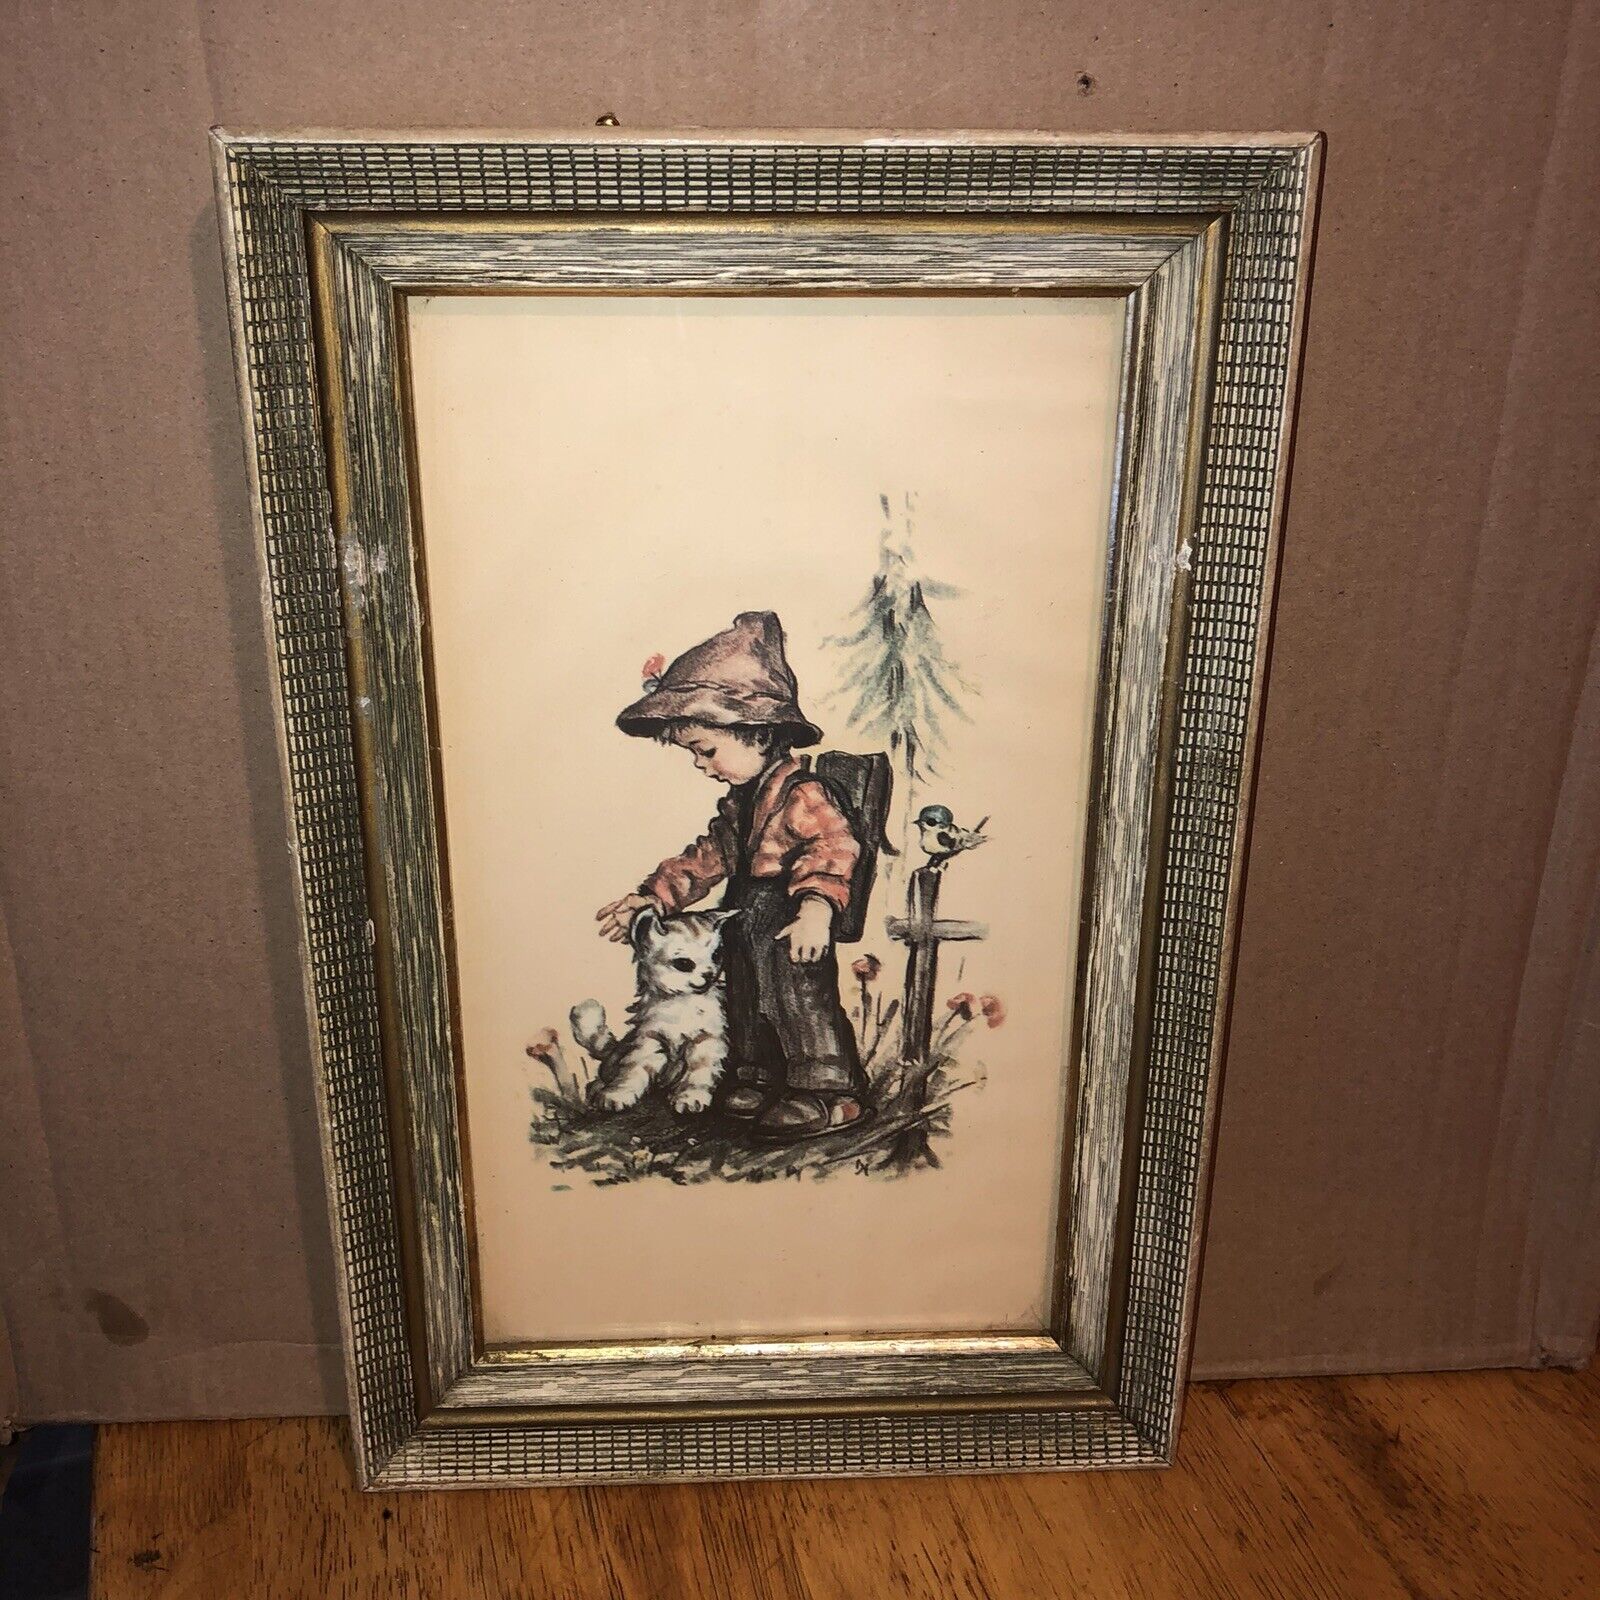 Framed Vintage Mcm Hummel ￼ Style Boy With Dog Picture Wall Hanging ￼ 11”x 17